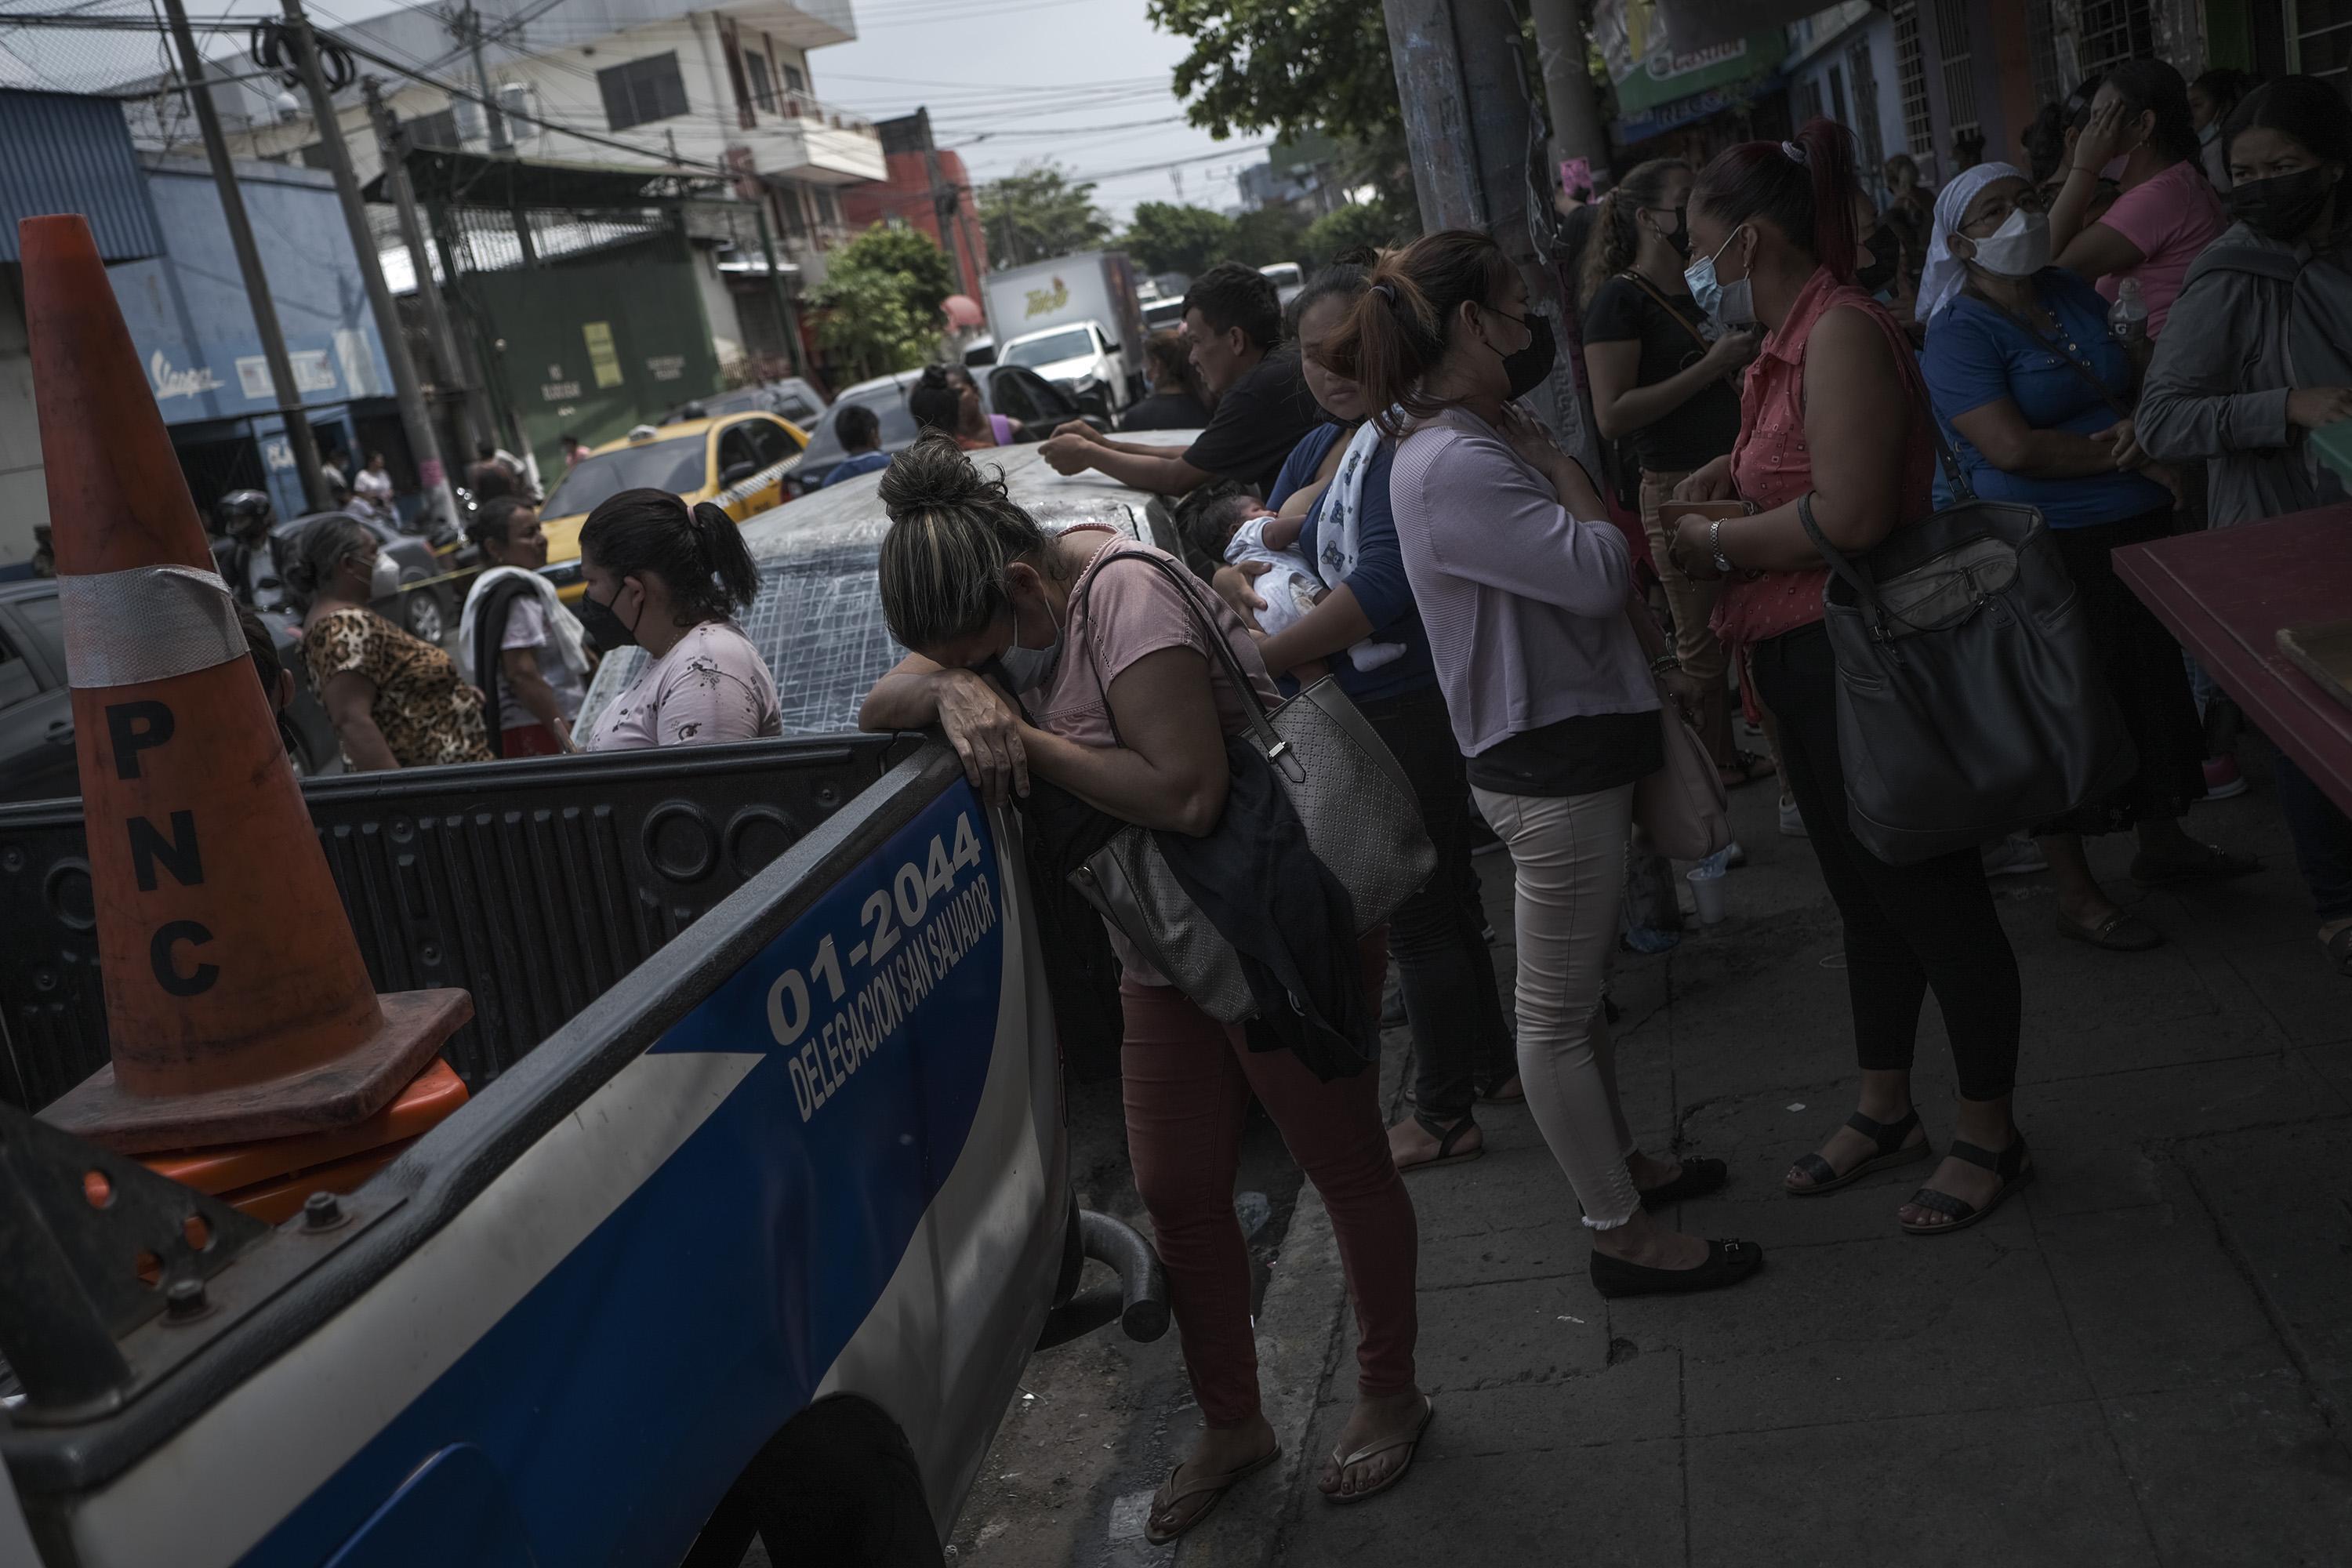 Family members, mostly women, travel to overcrowded detention facilities in search of their detained relatives, who under El Salvador